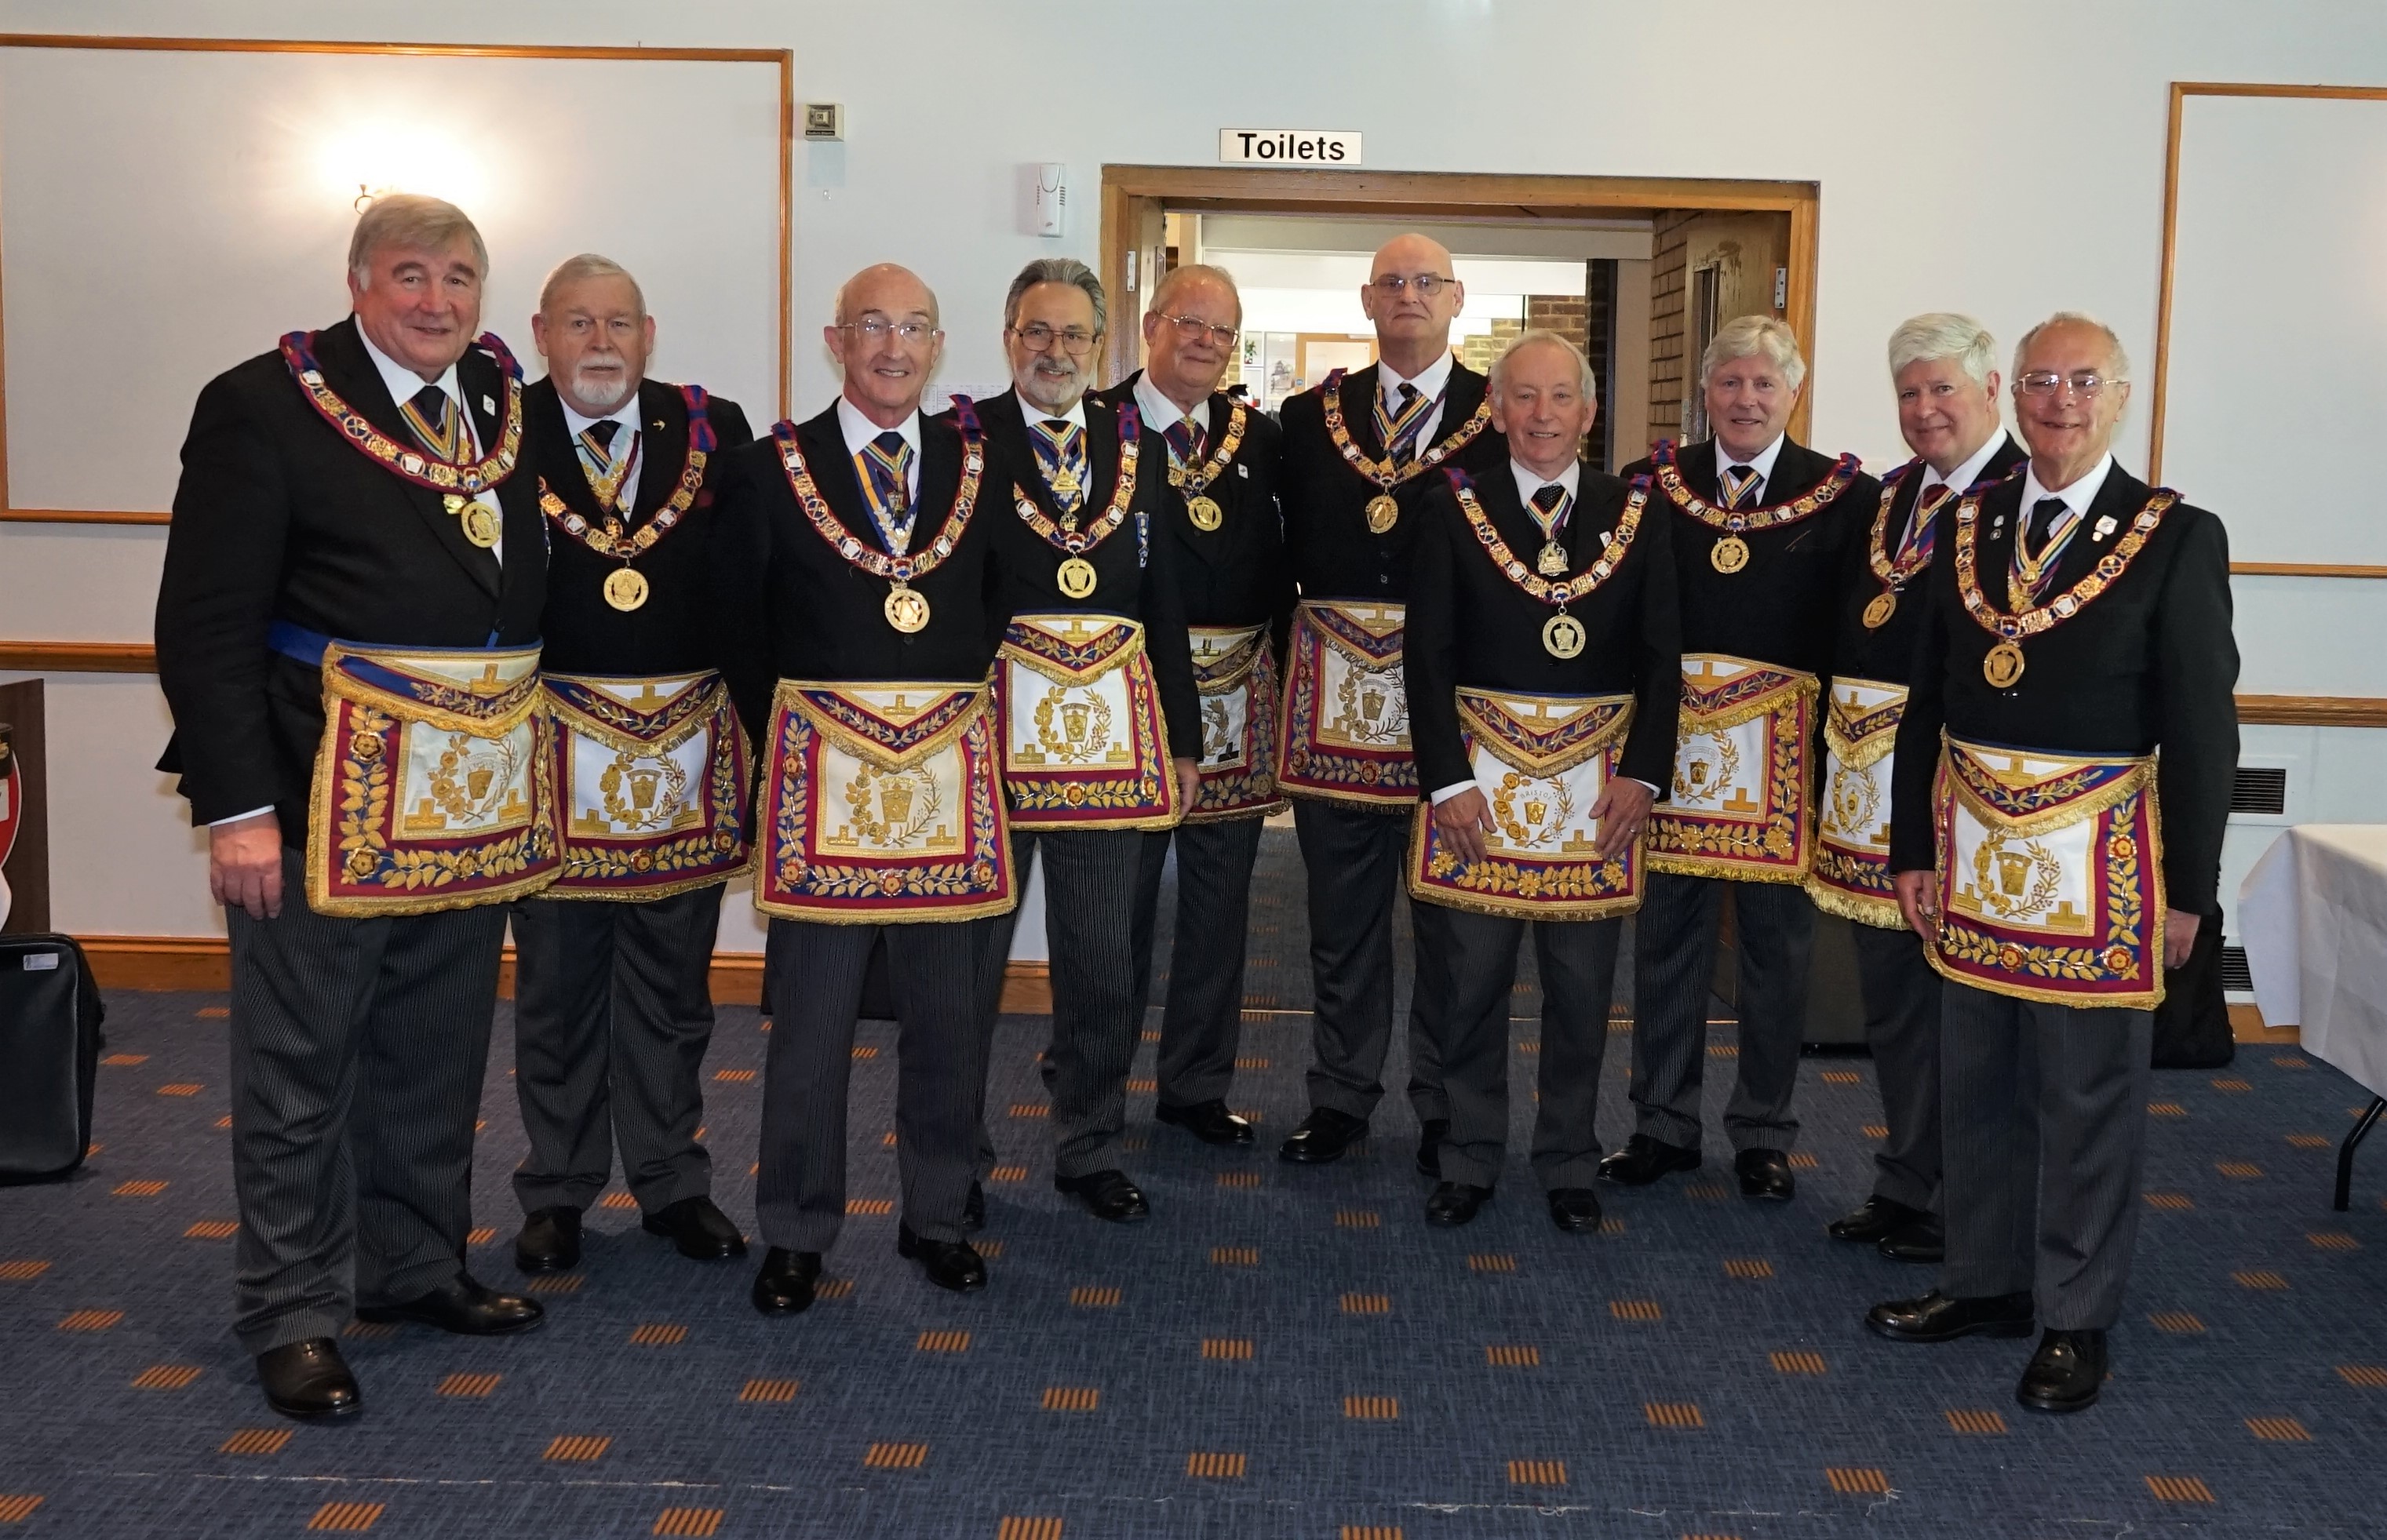 Provincial Grand Lodge of Mark Master Masons of Monmouthshire Annual Meeting